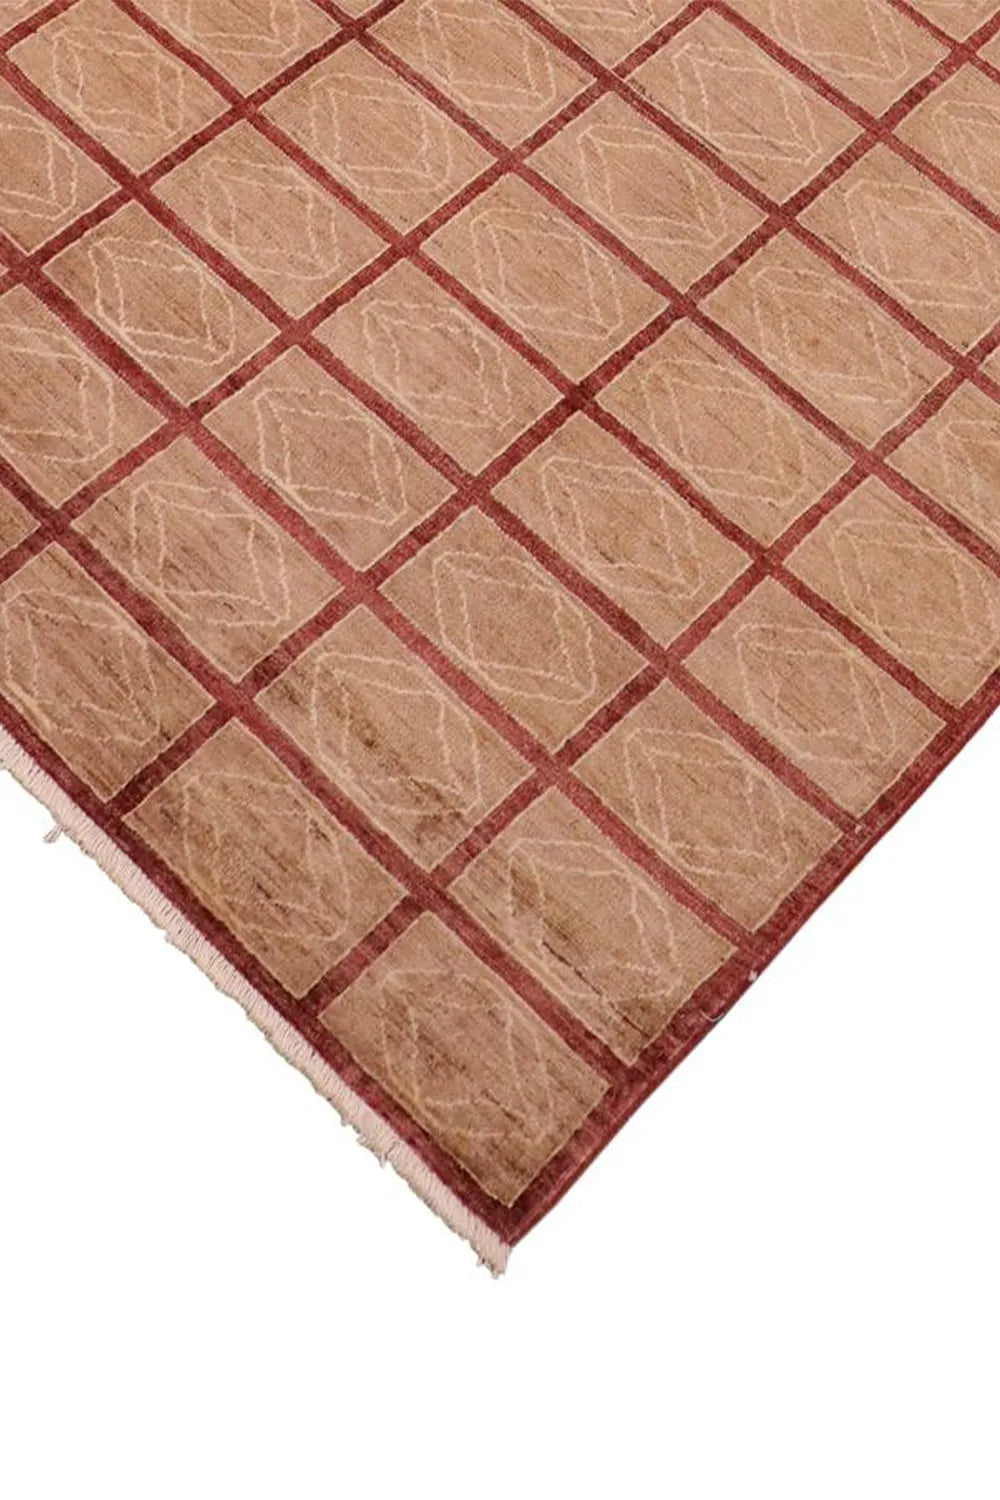 Elegant Red and Brown Wool Rug, a statement piece for discerning decorators.